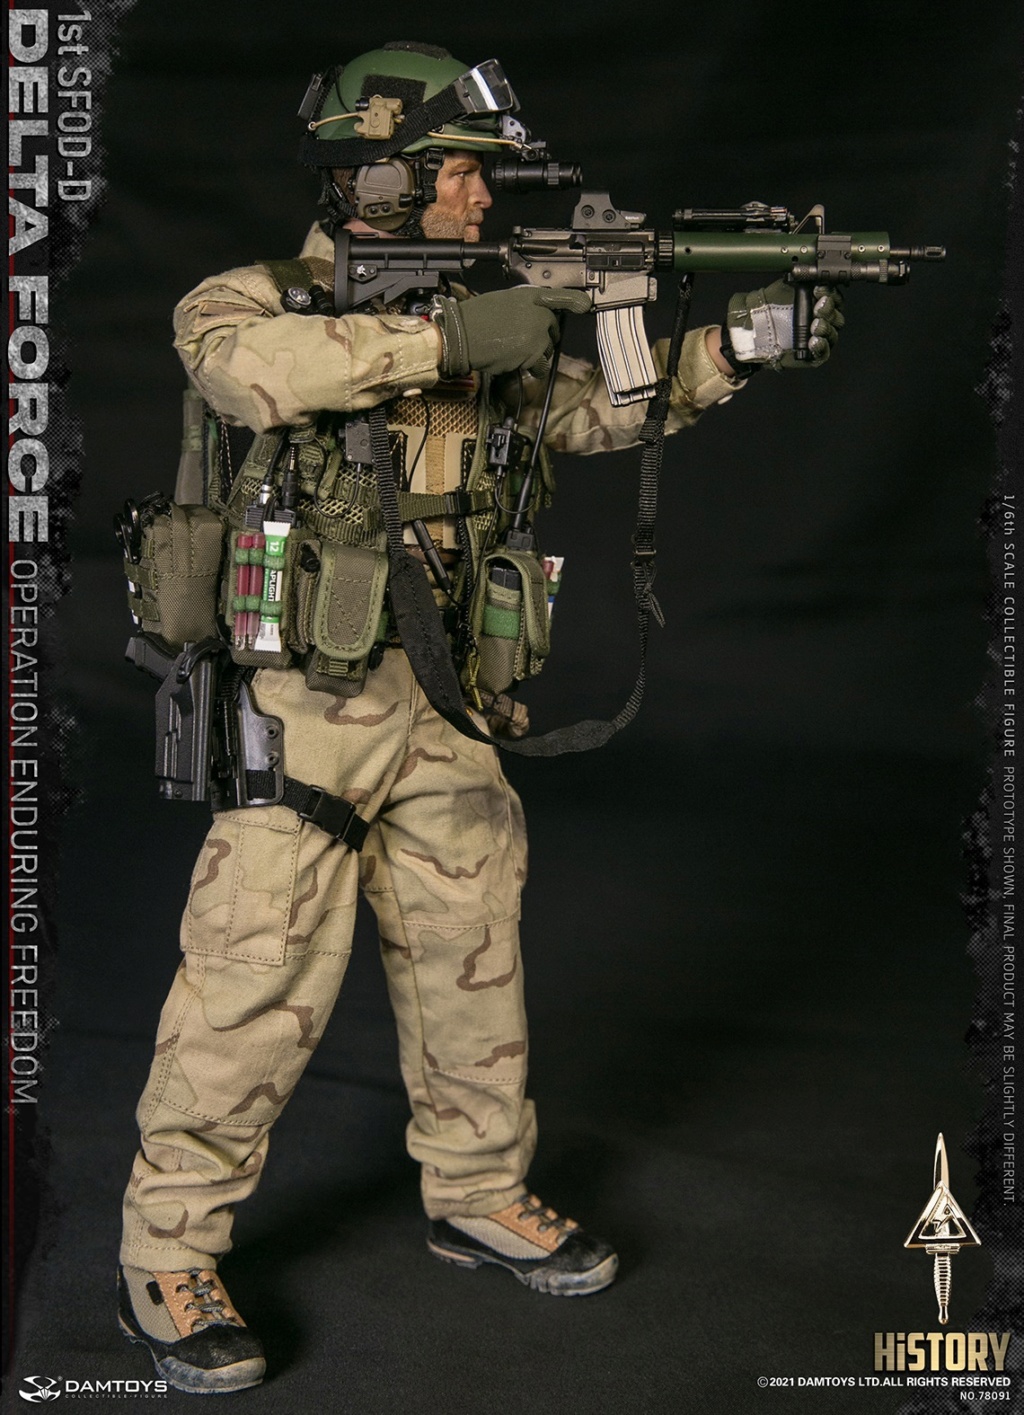 modernmilitary - NEW PRODUCT: DAMTOYS: 1/6 Delta Forces 1st SFOD-D Operation Enduring Freedom #78091 10520010